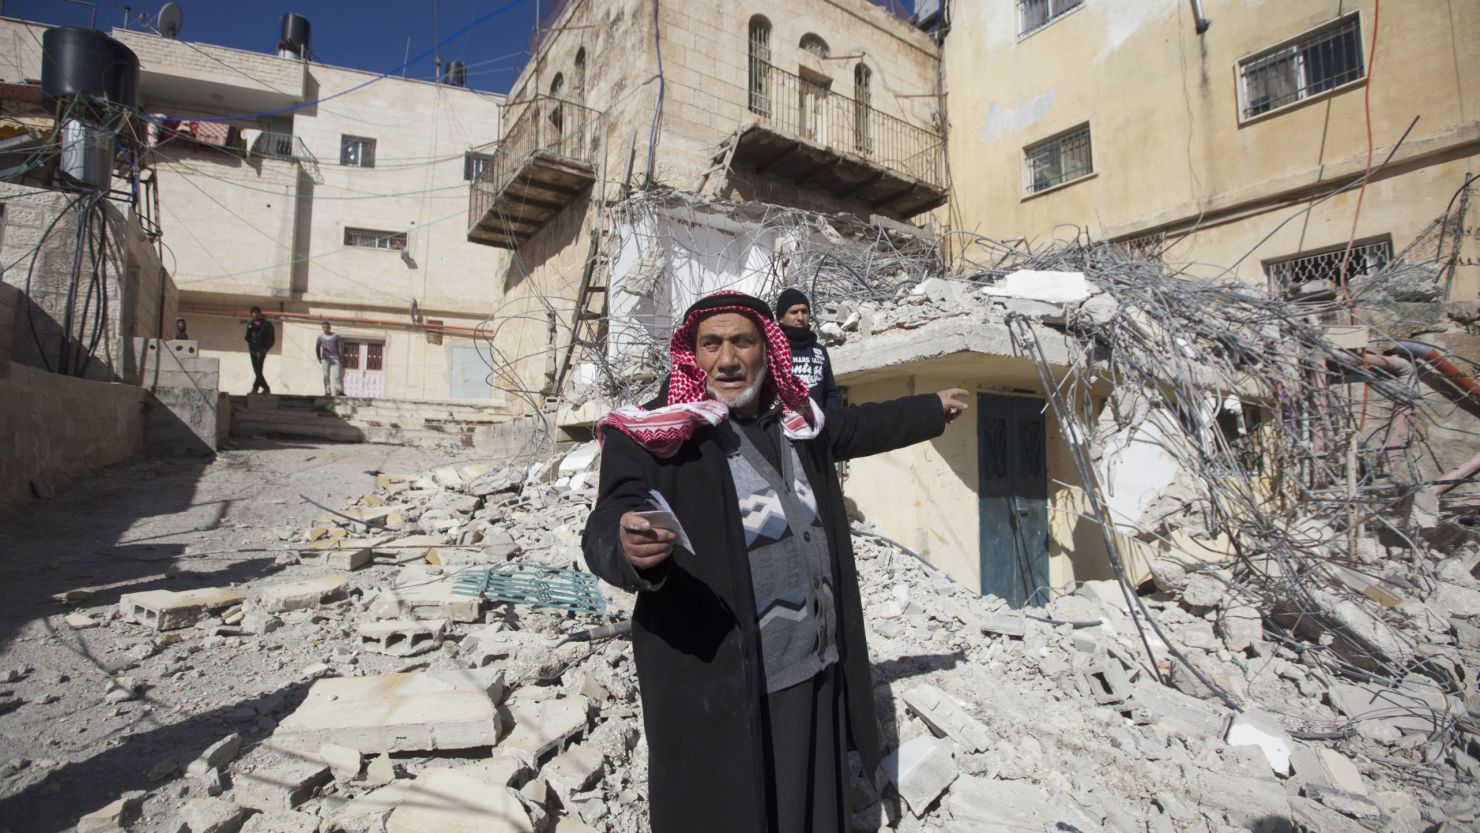 A Palestinian man points toward a home demolished by Israeli bulldozers in Arab East Jerusalem on January 15.